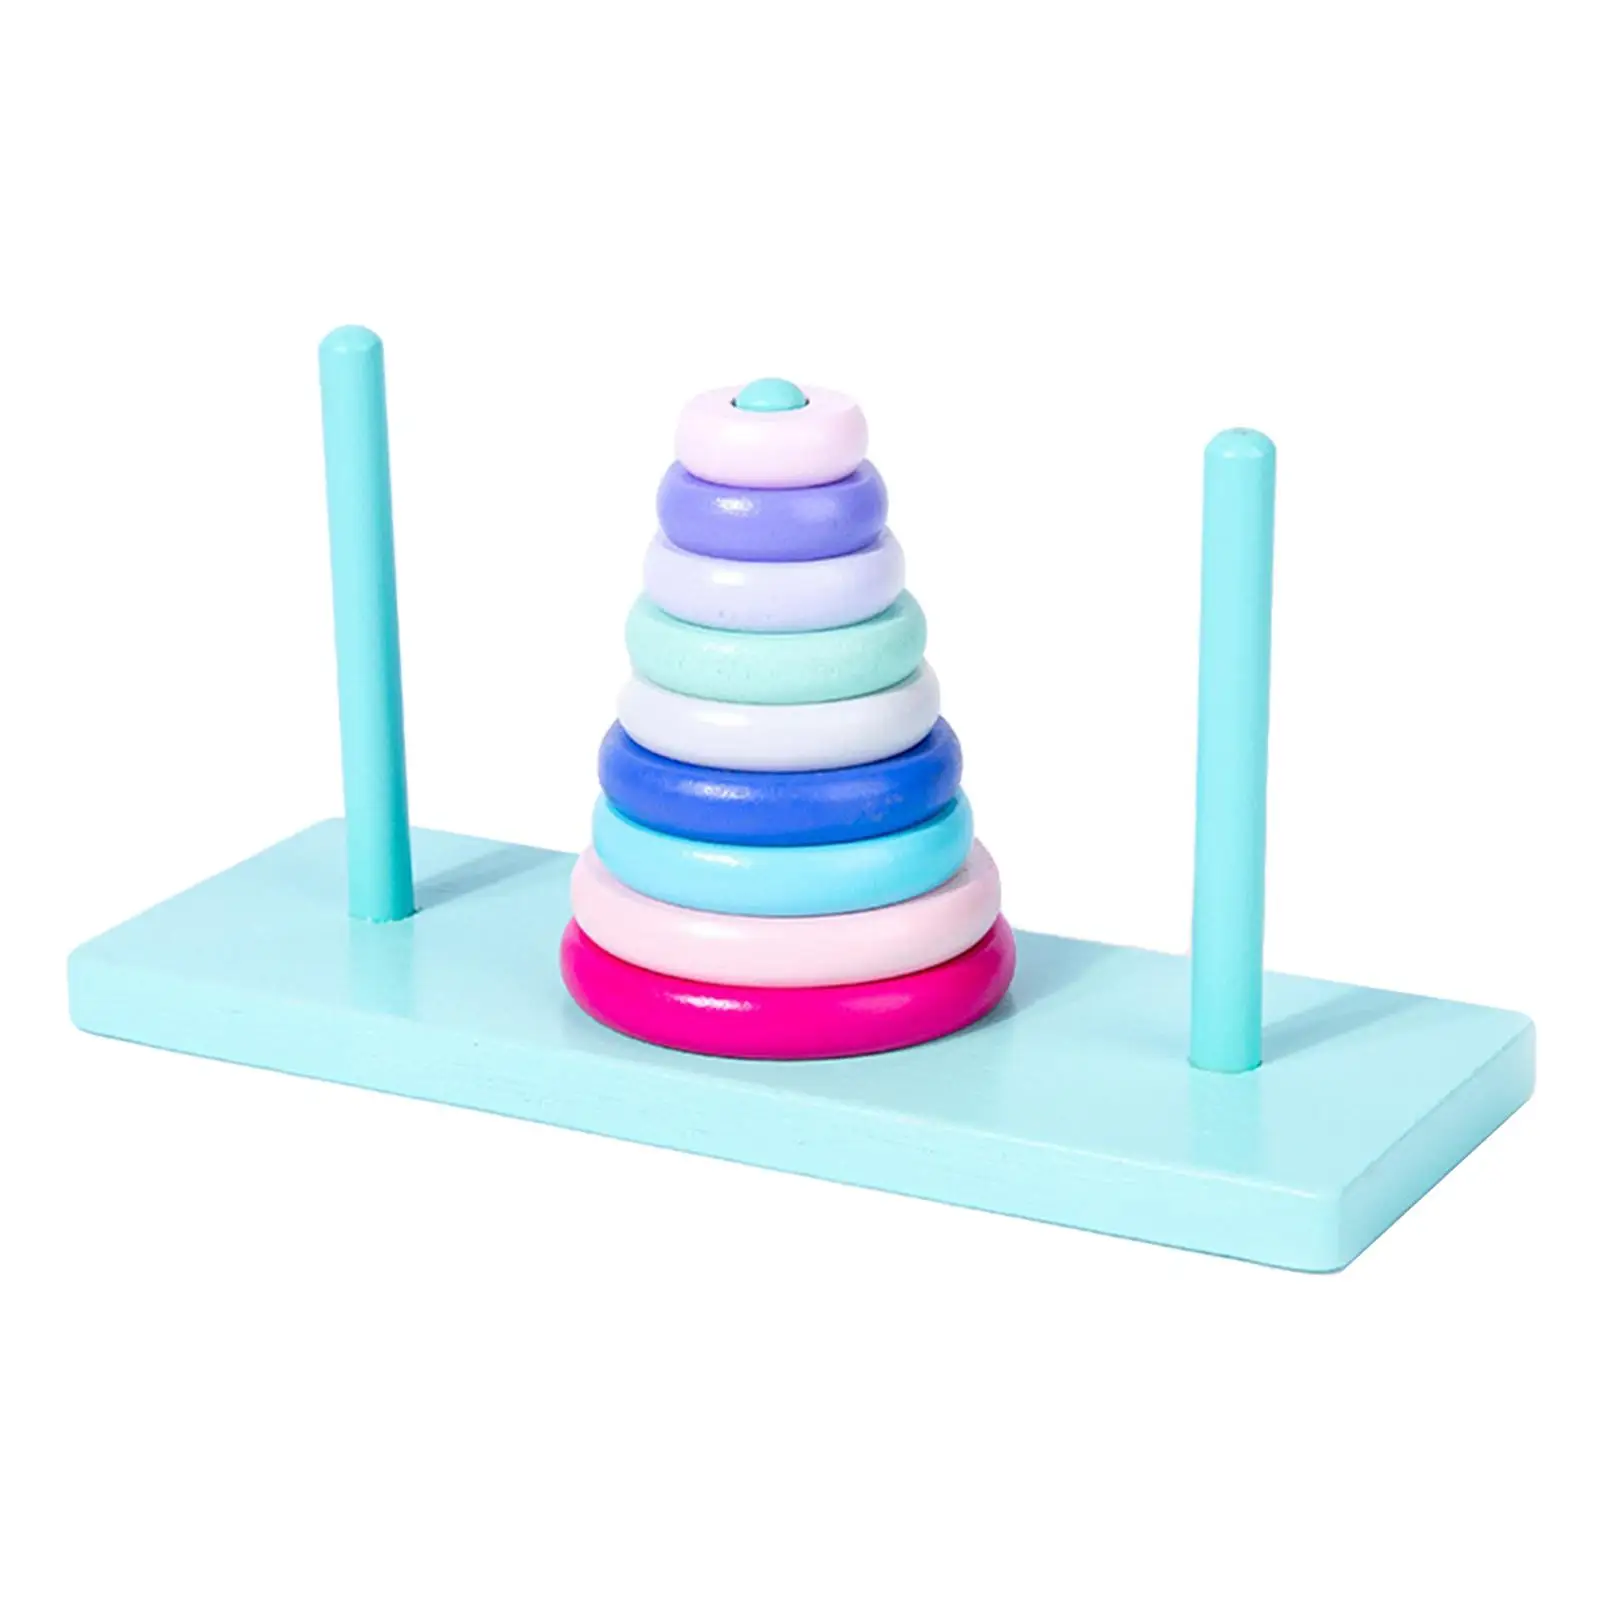 Stacking Rings Toy Stacker for Toddlers Color Recognition Blocks Gifts